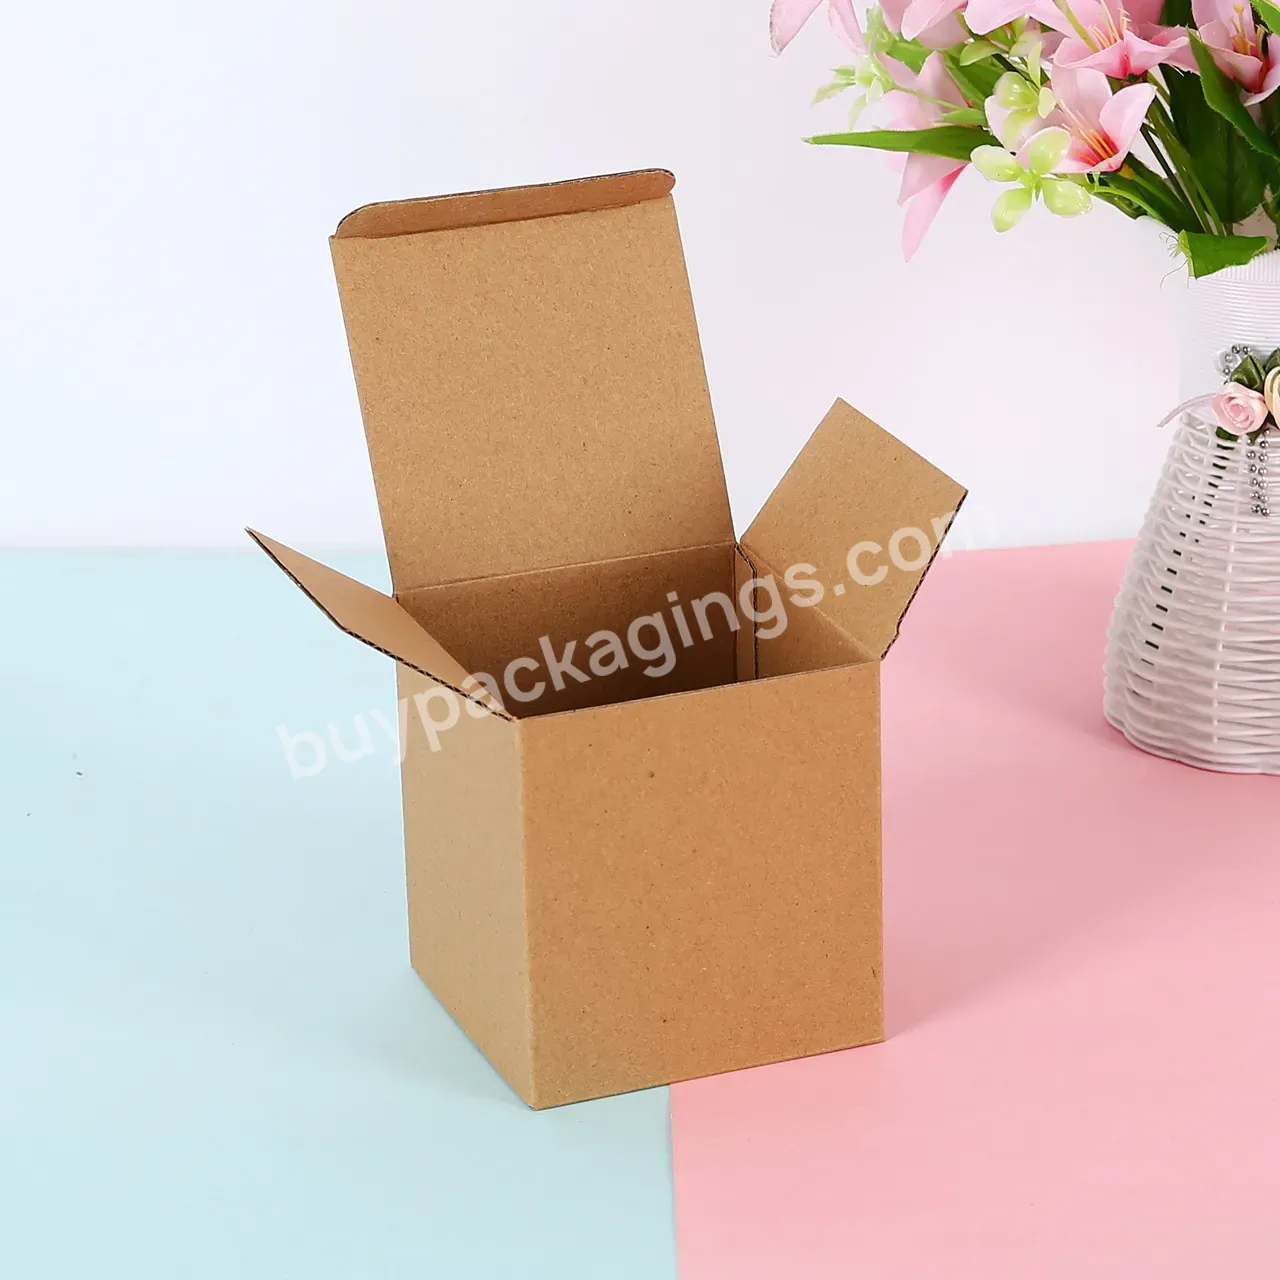 Christmas Recyclable Gift Packaging Small Size Candle Scented Brown Foldable Cardboard Box